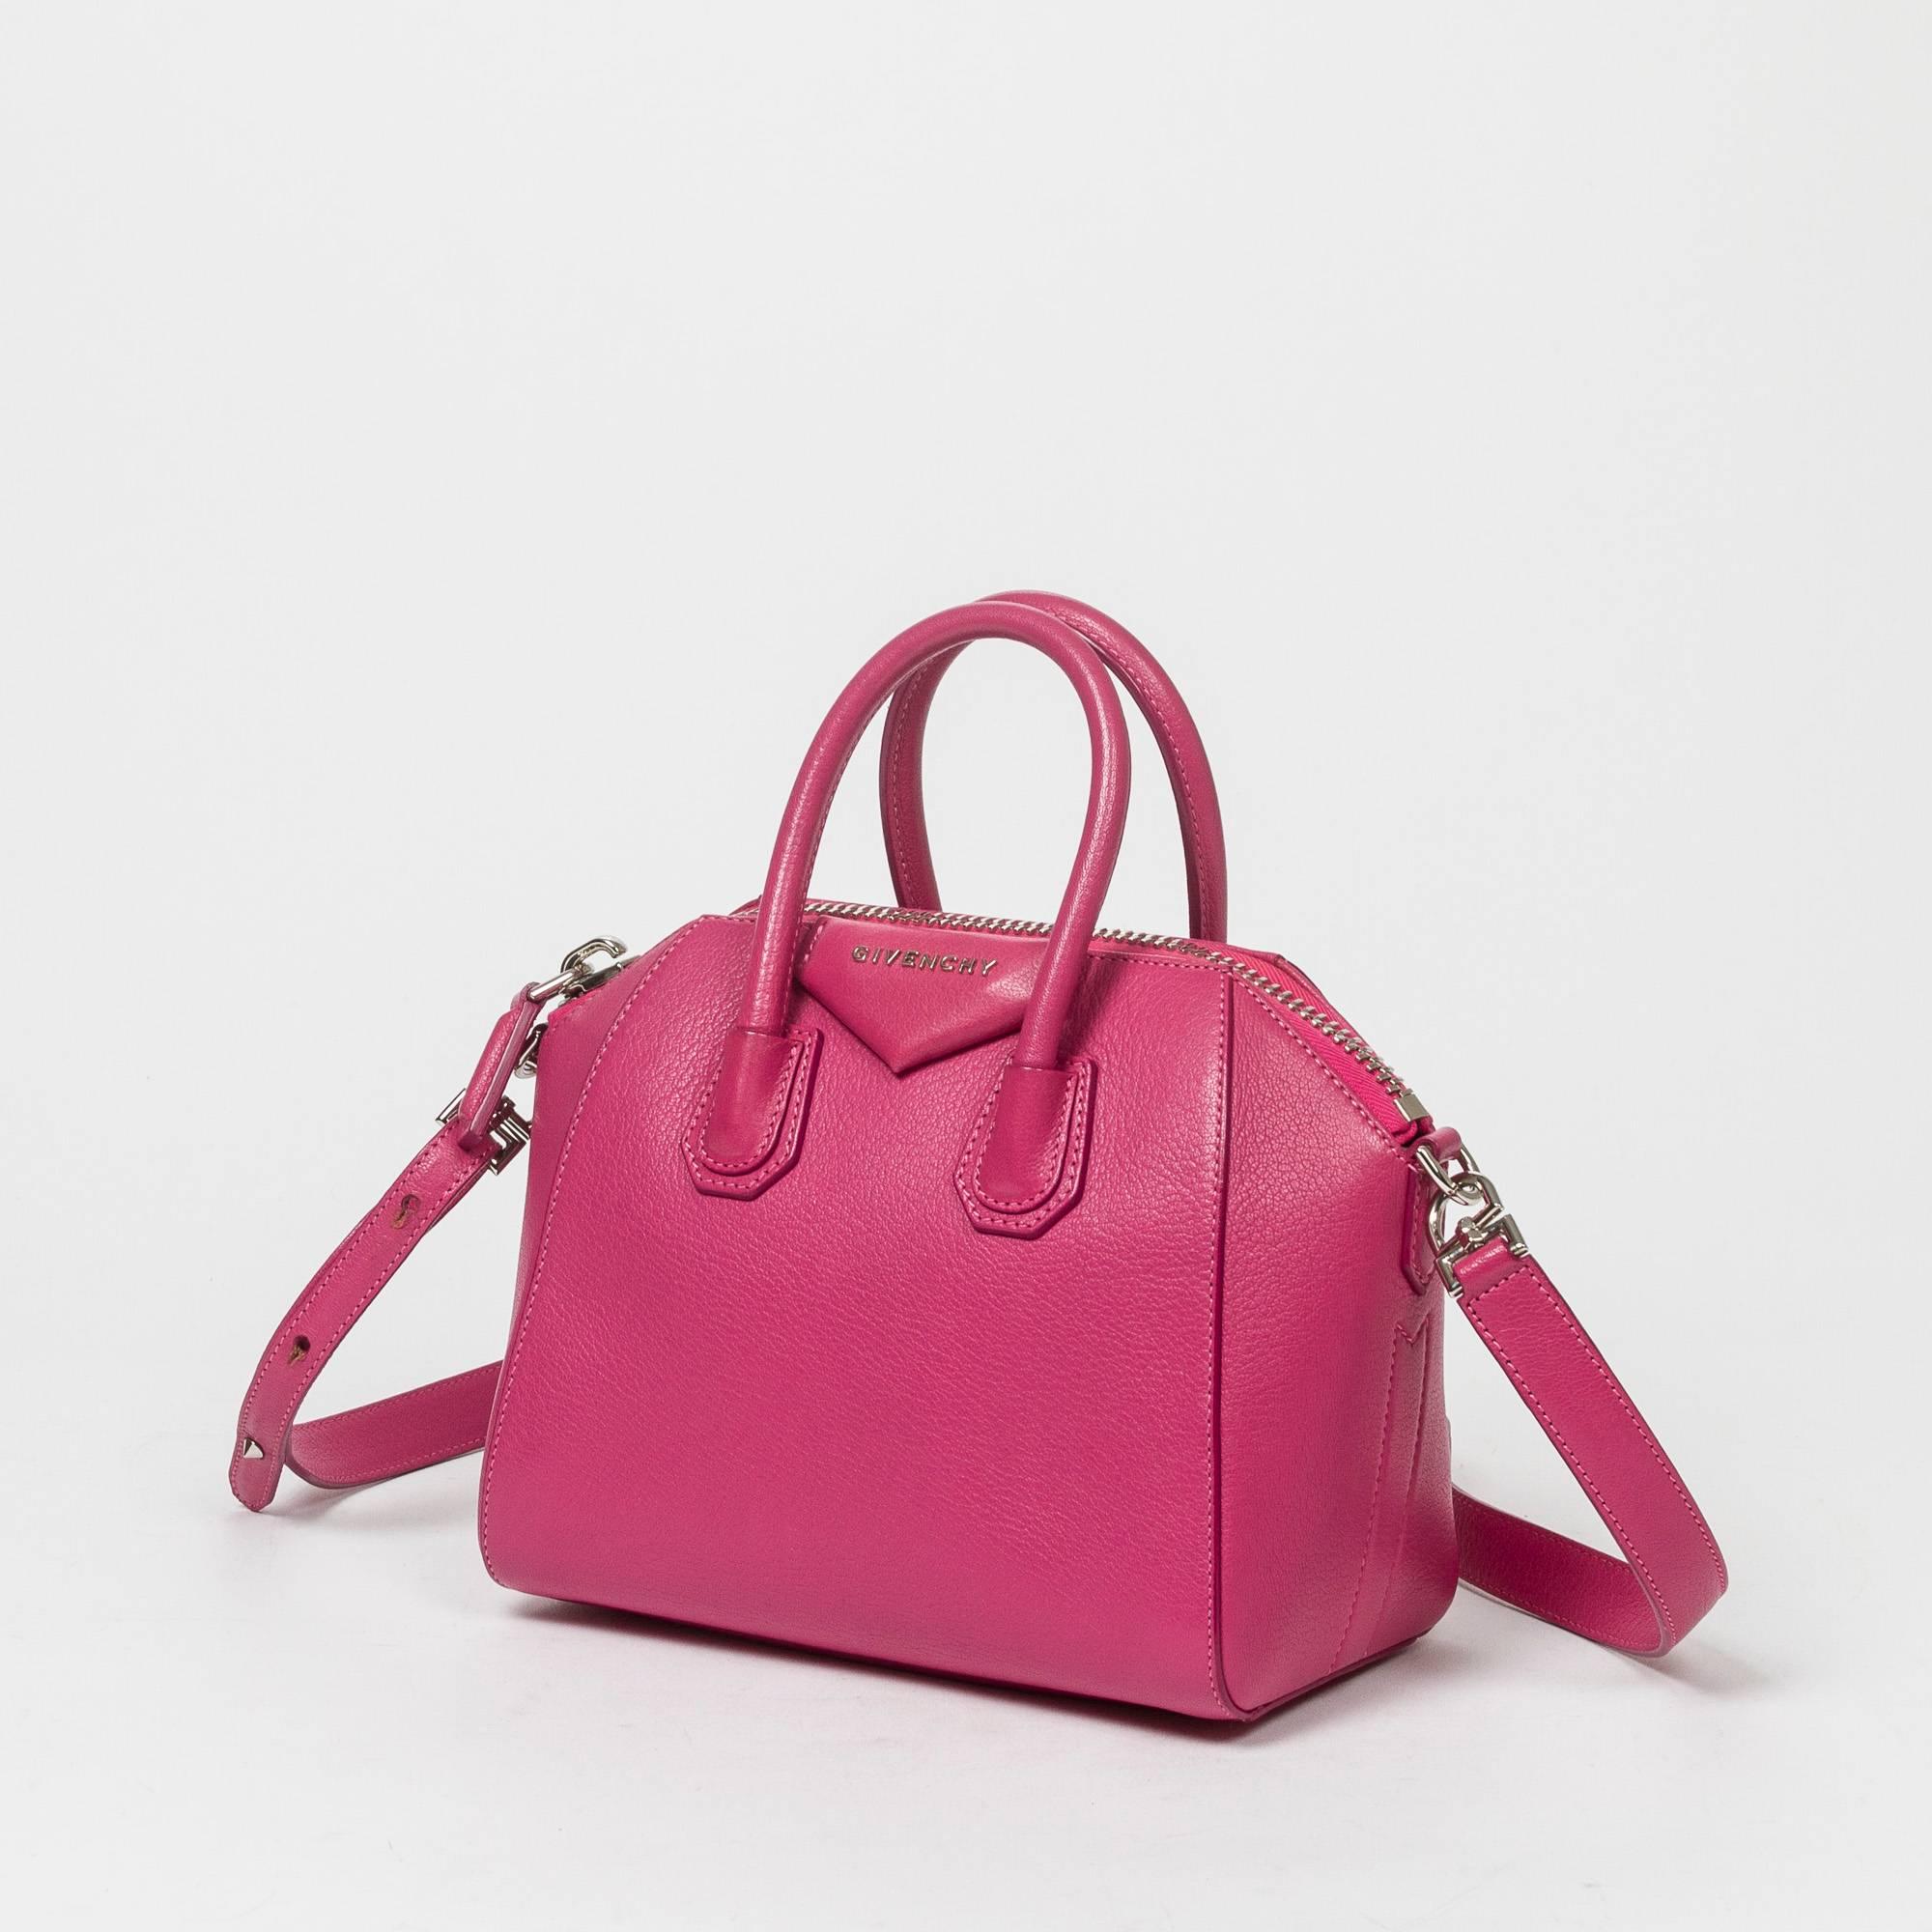 Antigona Mini in fuchsia grained leather with optional shoulder strap and silver tone hardware. Zip closure. Beige fabric lined interior with 2 slip pockets and one zip pocket. Production number 3C0114. Dustbag included. Very light signs of wear on